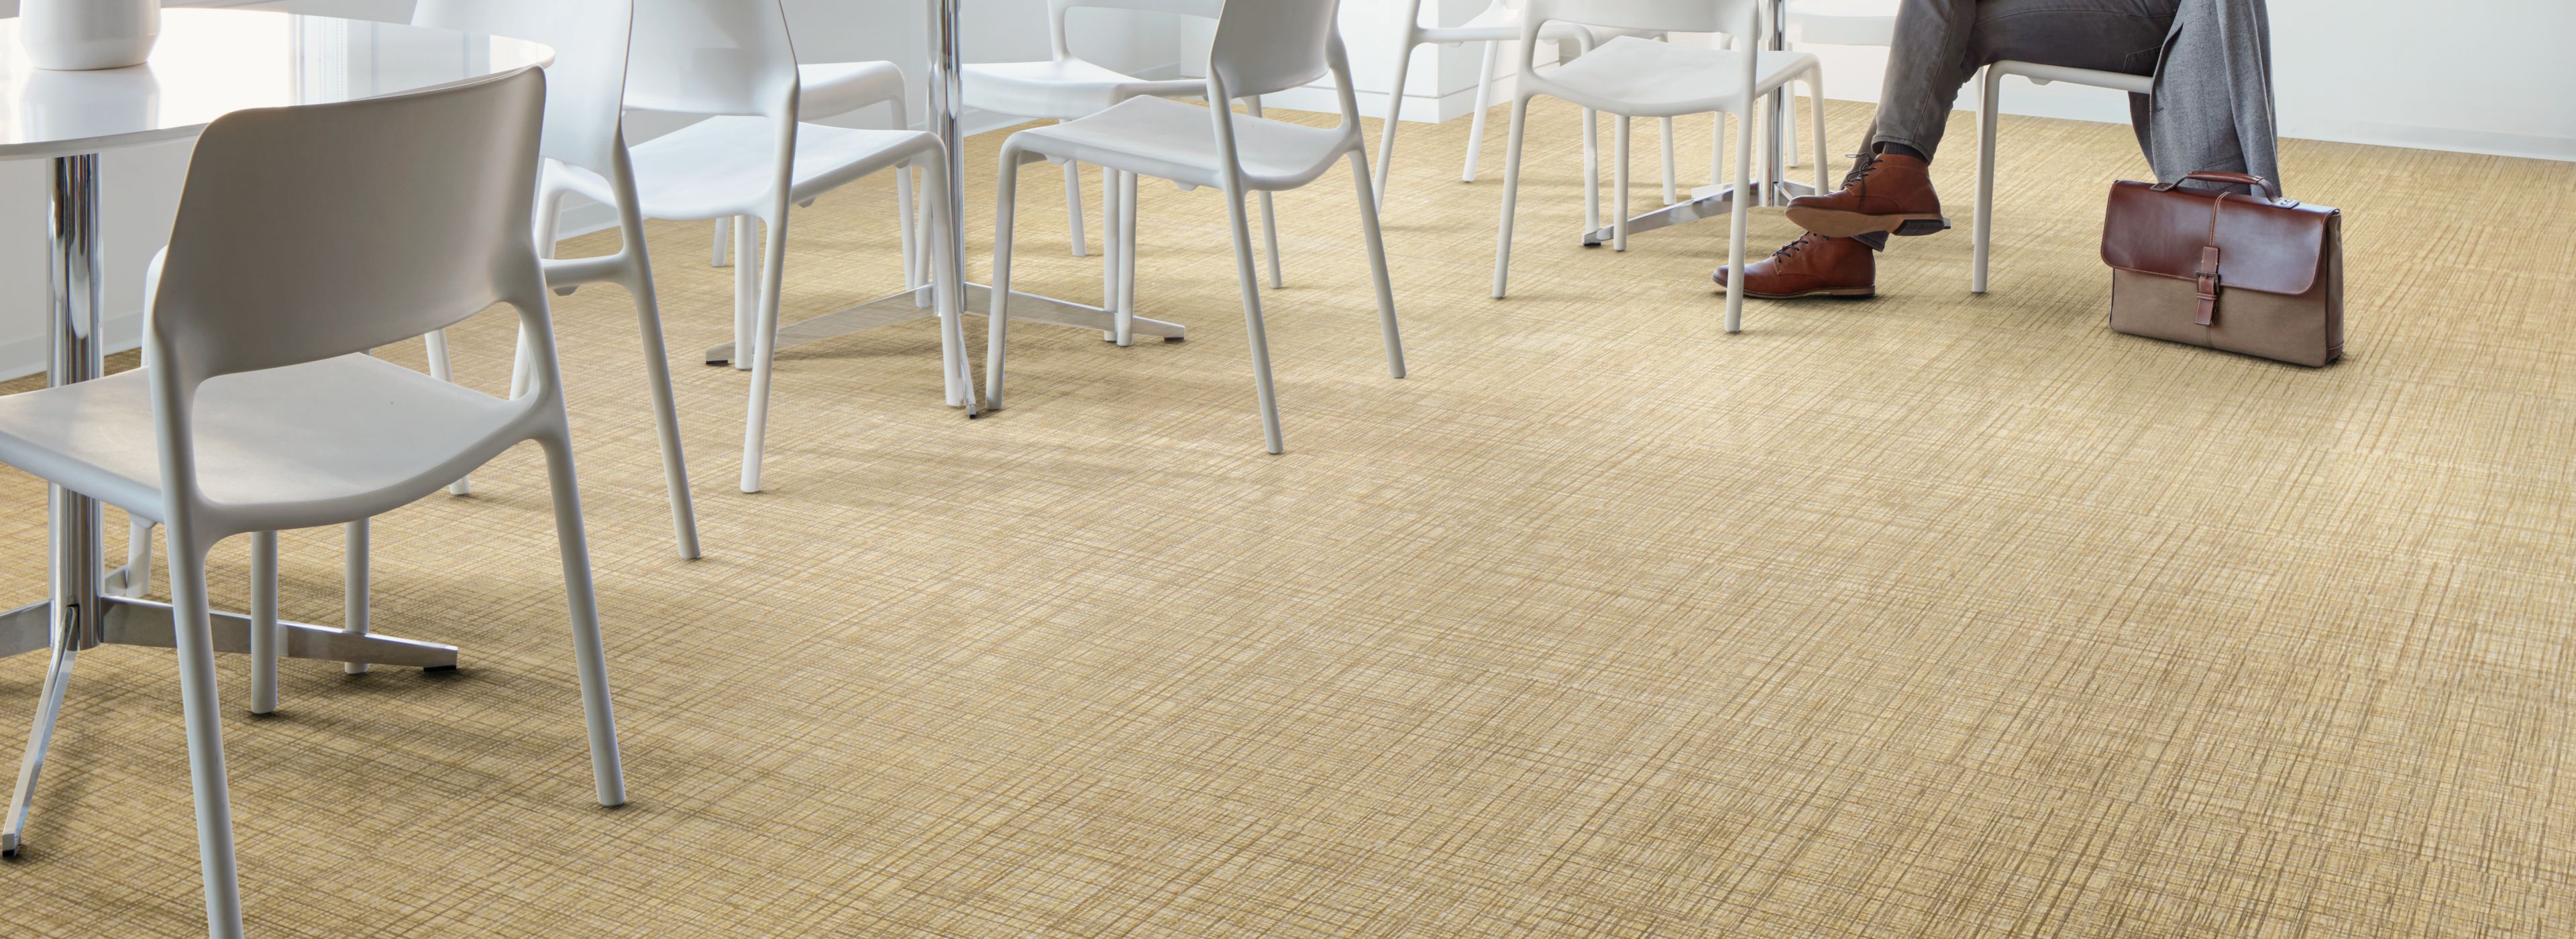 Interface Native Fabric LVT in office common area with tables and chairs número de imagen 1